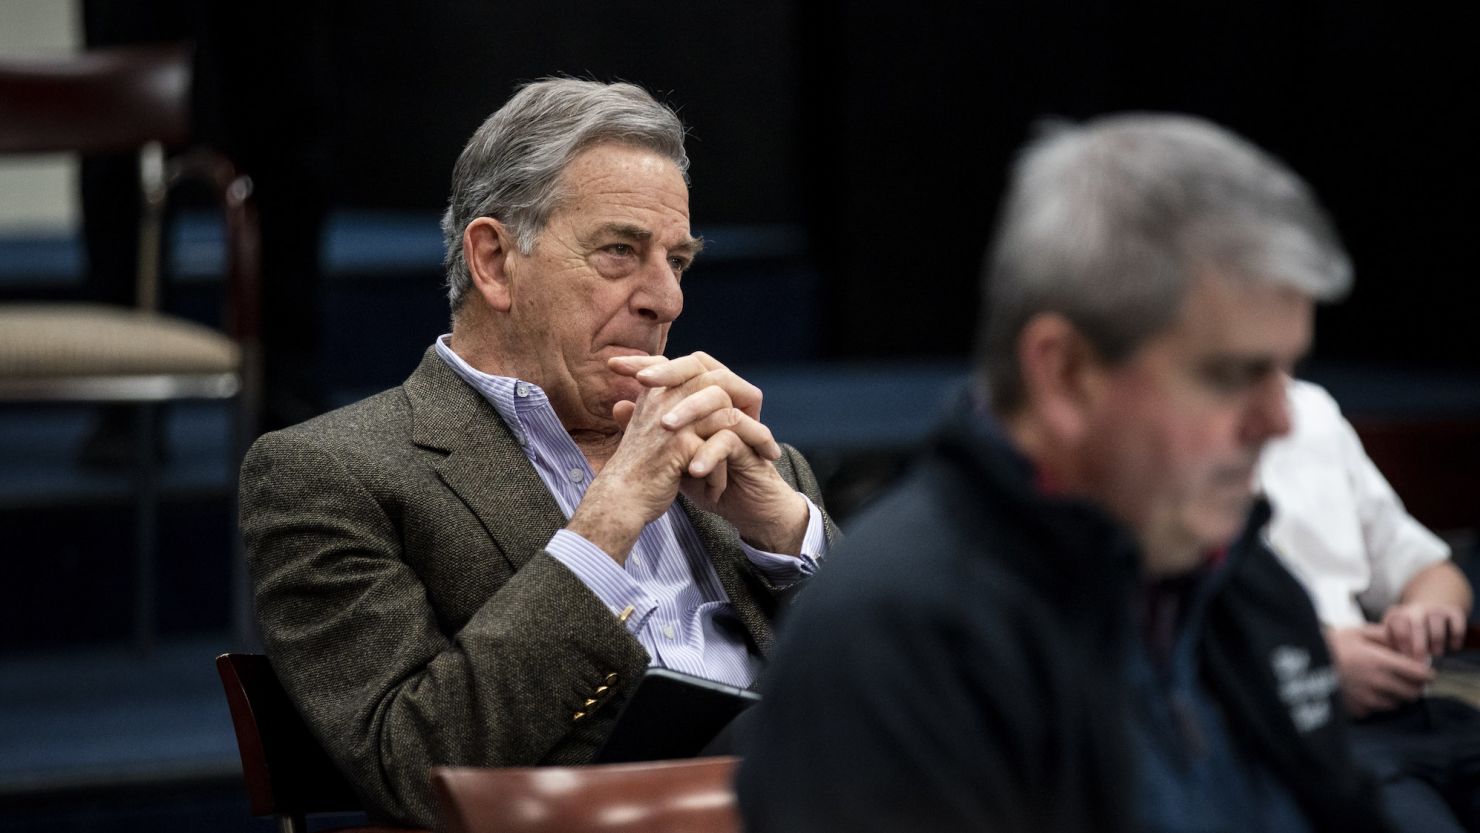 Paul Pelosi, husband of House Speaker Nancy Pelosi, listens during a news conference on Capitol Hill in Washington, DC, on March 26, 2020. 